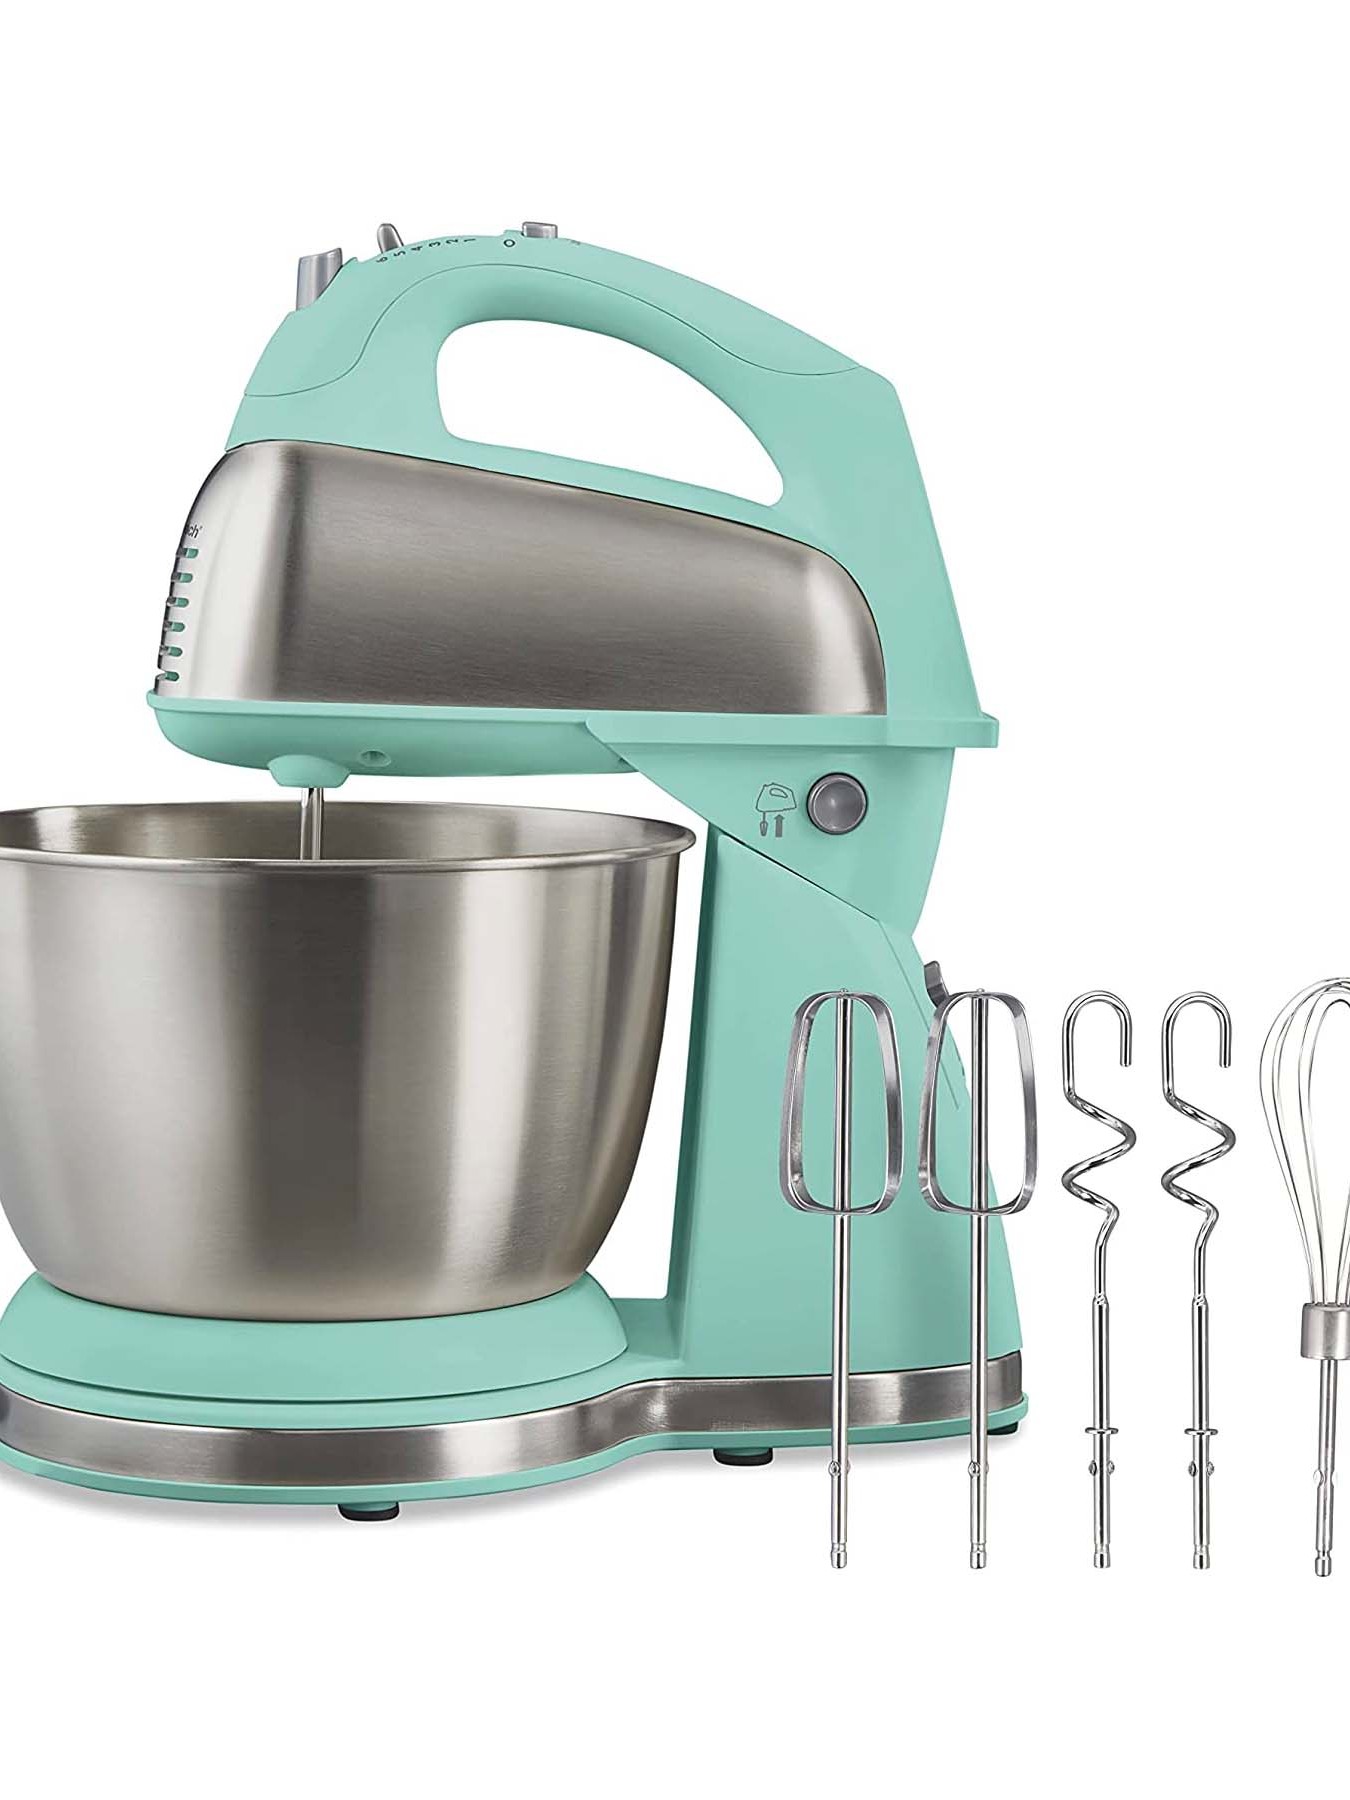 https://video-images.vice.com//products/6408f1f473caf8d34ad57c90/gallery-image/1678307829313-best-stand-mixers-hamilton-beach-classic-stand-hand-mixer.jpeg?crop=0.75xw:1xh;center,center